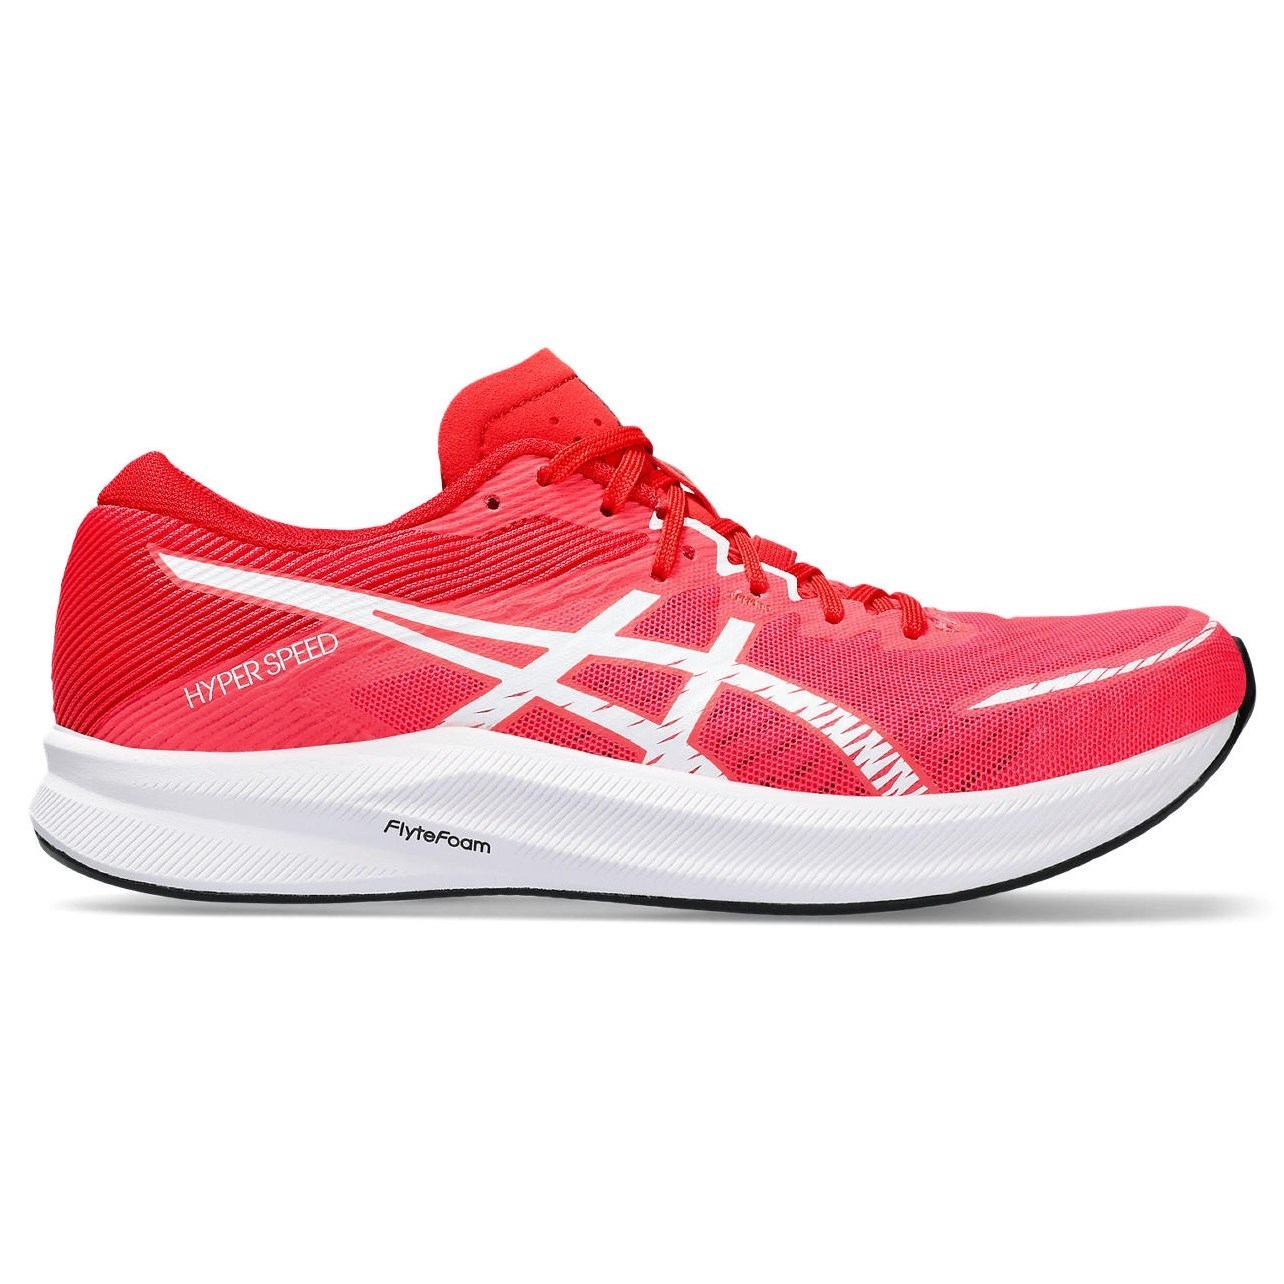 Asics Hyper Speed 3 - Womens Road Racing Shoes - Diva Pink/White ...